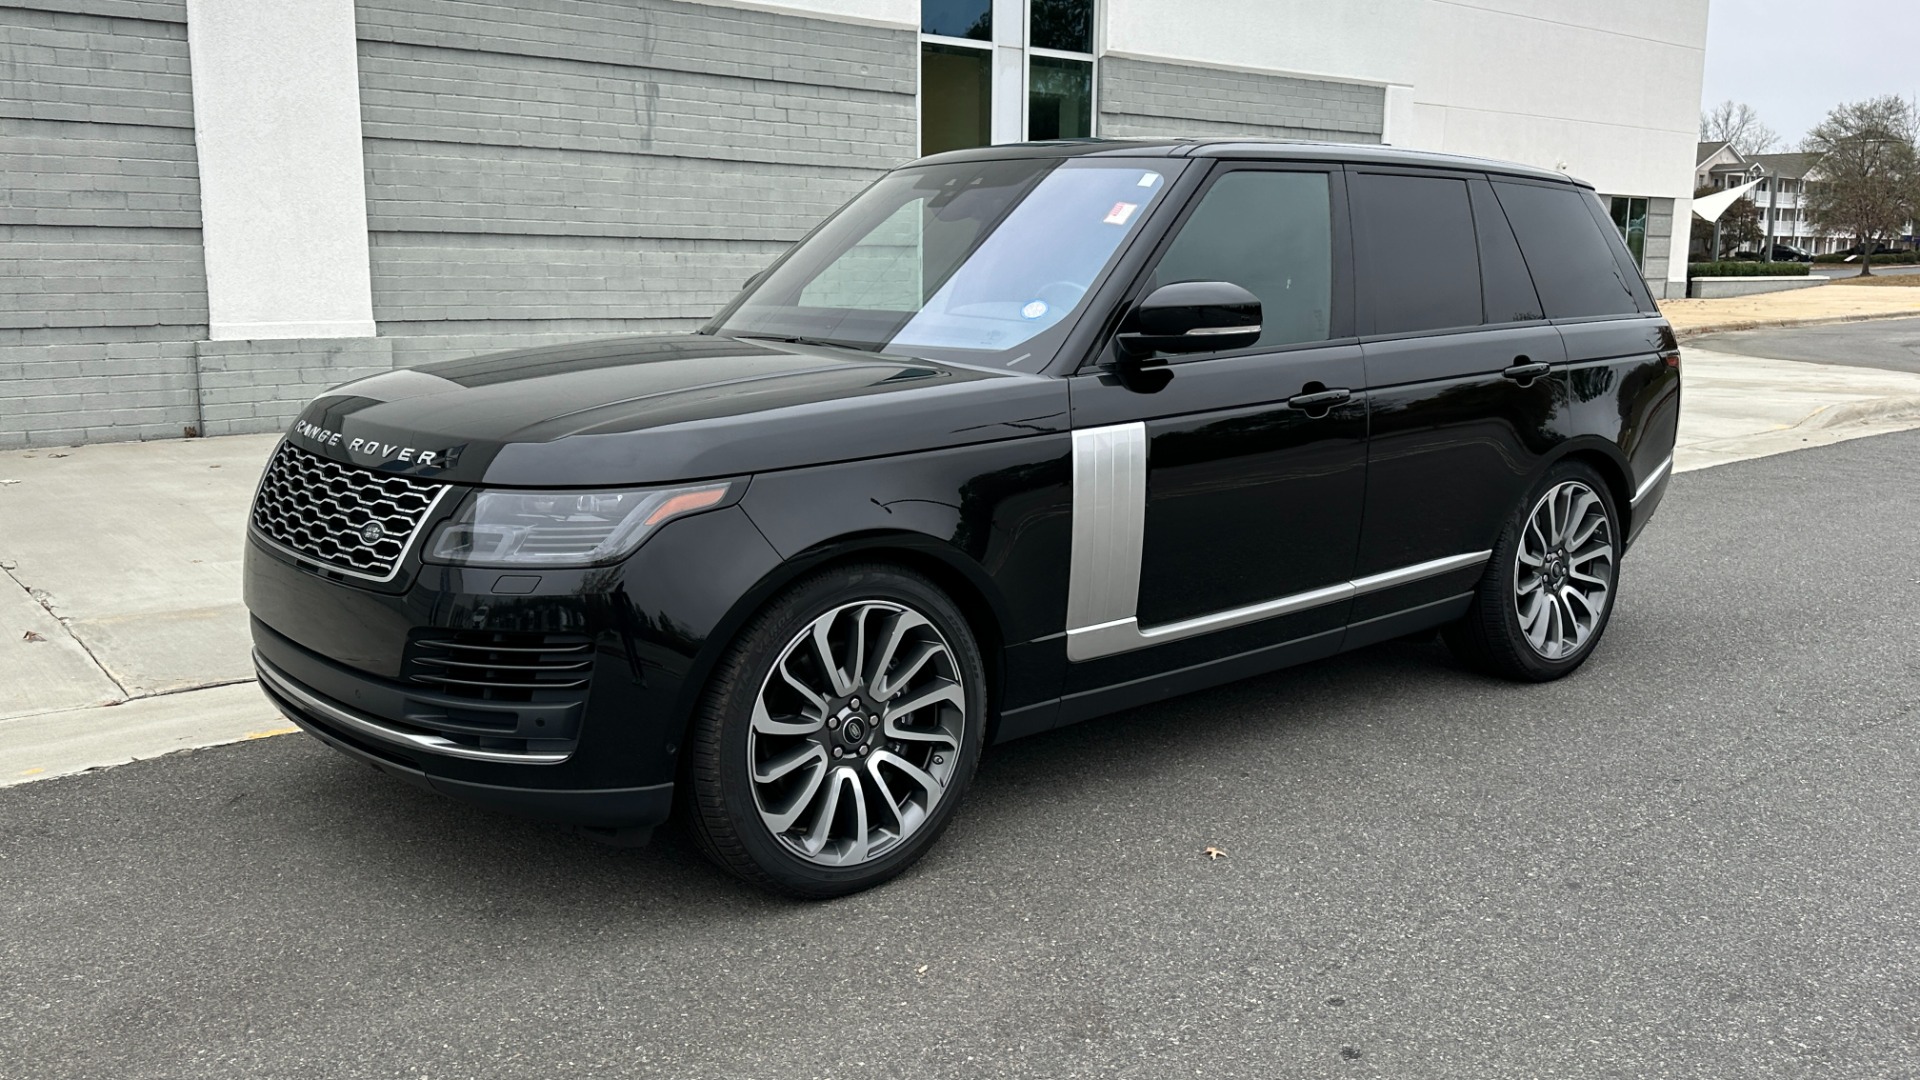 Used 2020 Land Rover Range Rover P525 HSE / DRIVE PRO PACK / 22IN WHEELS / MERIDIAN SOUND / REAR CONVENIENCE for sale $72,000 at Formula Imports in Charlotte NC 28227 2